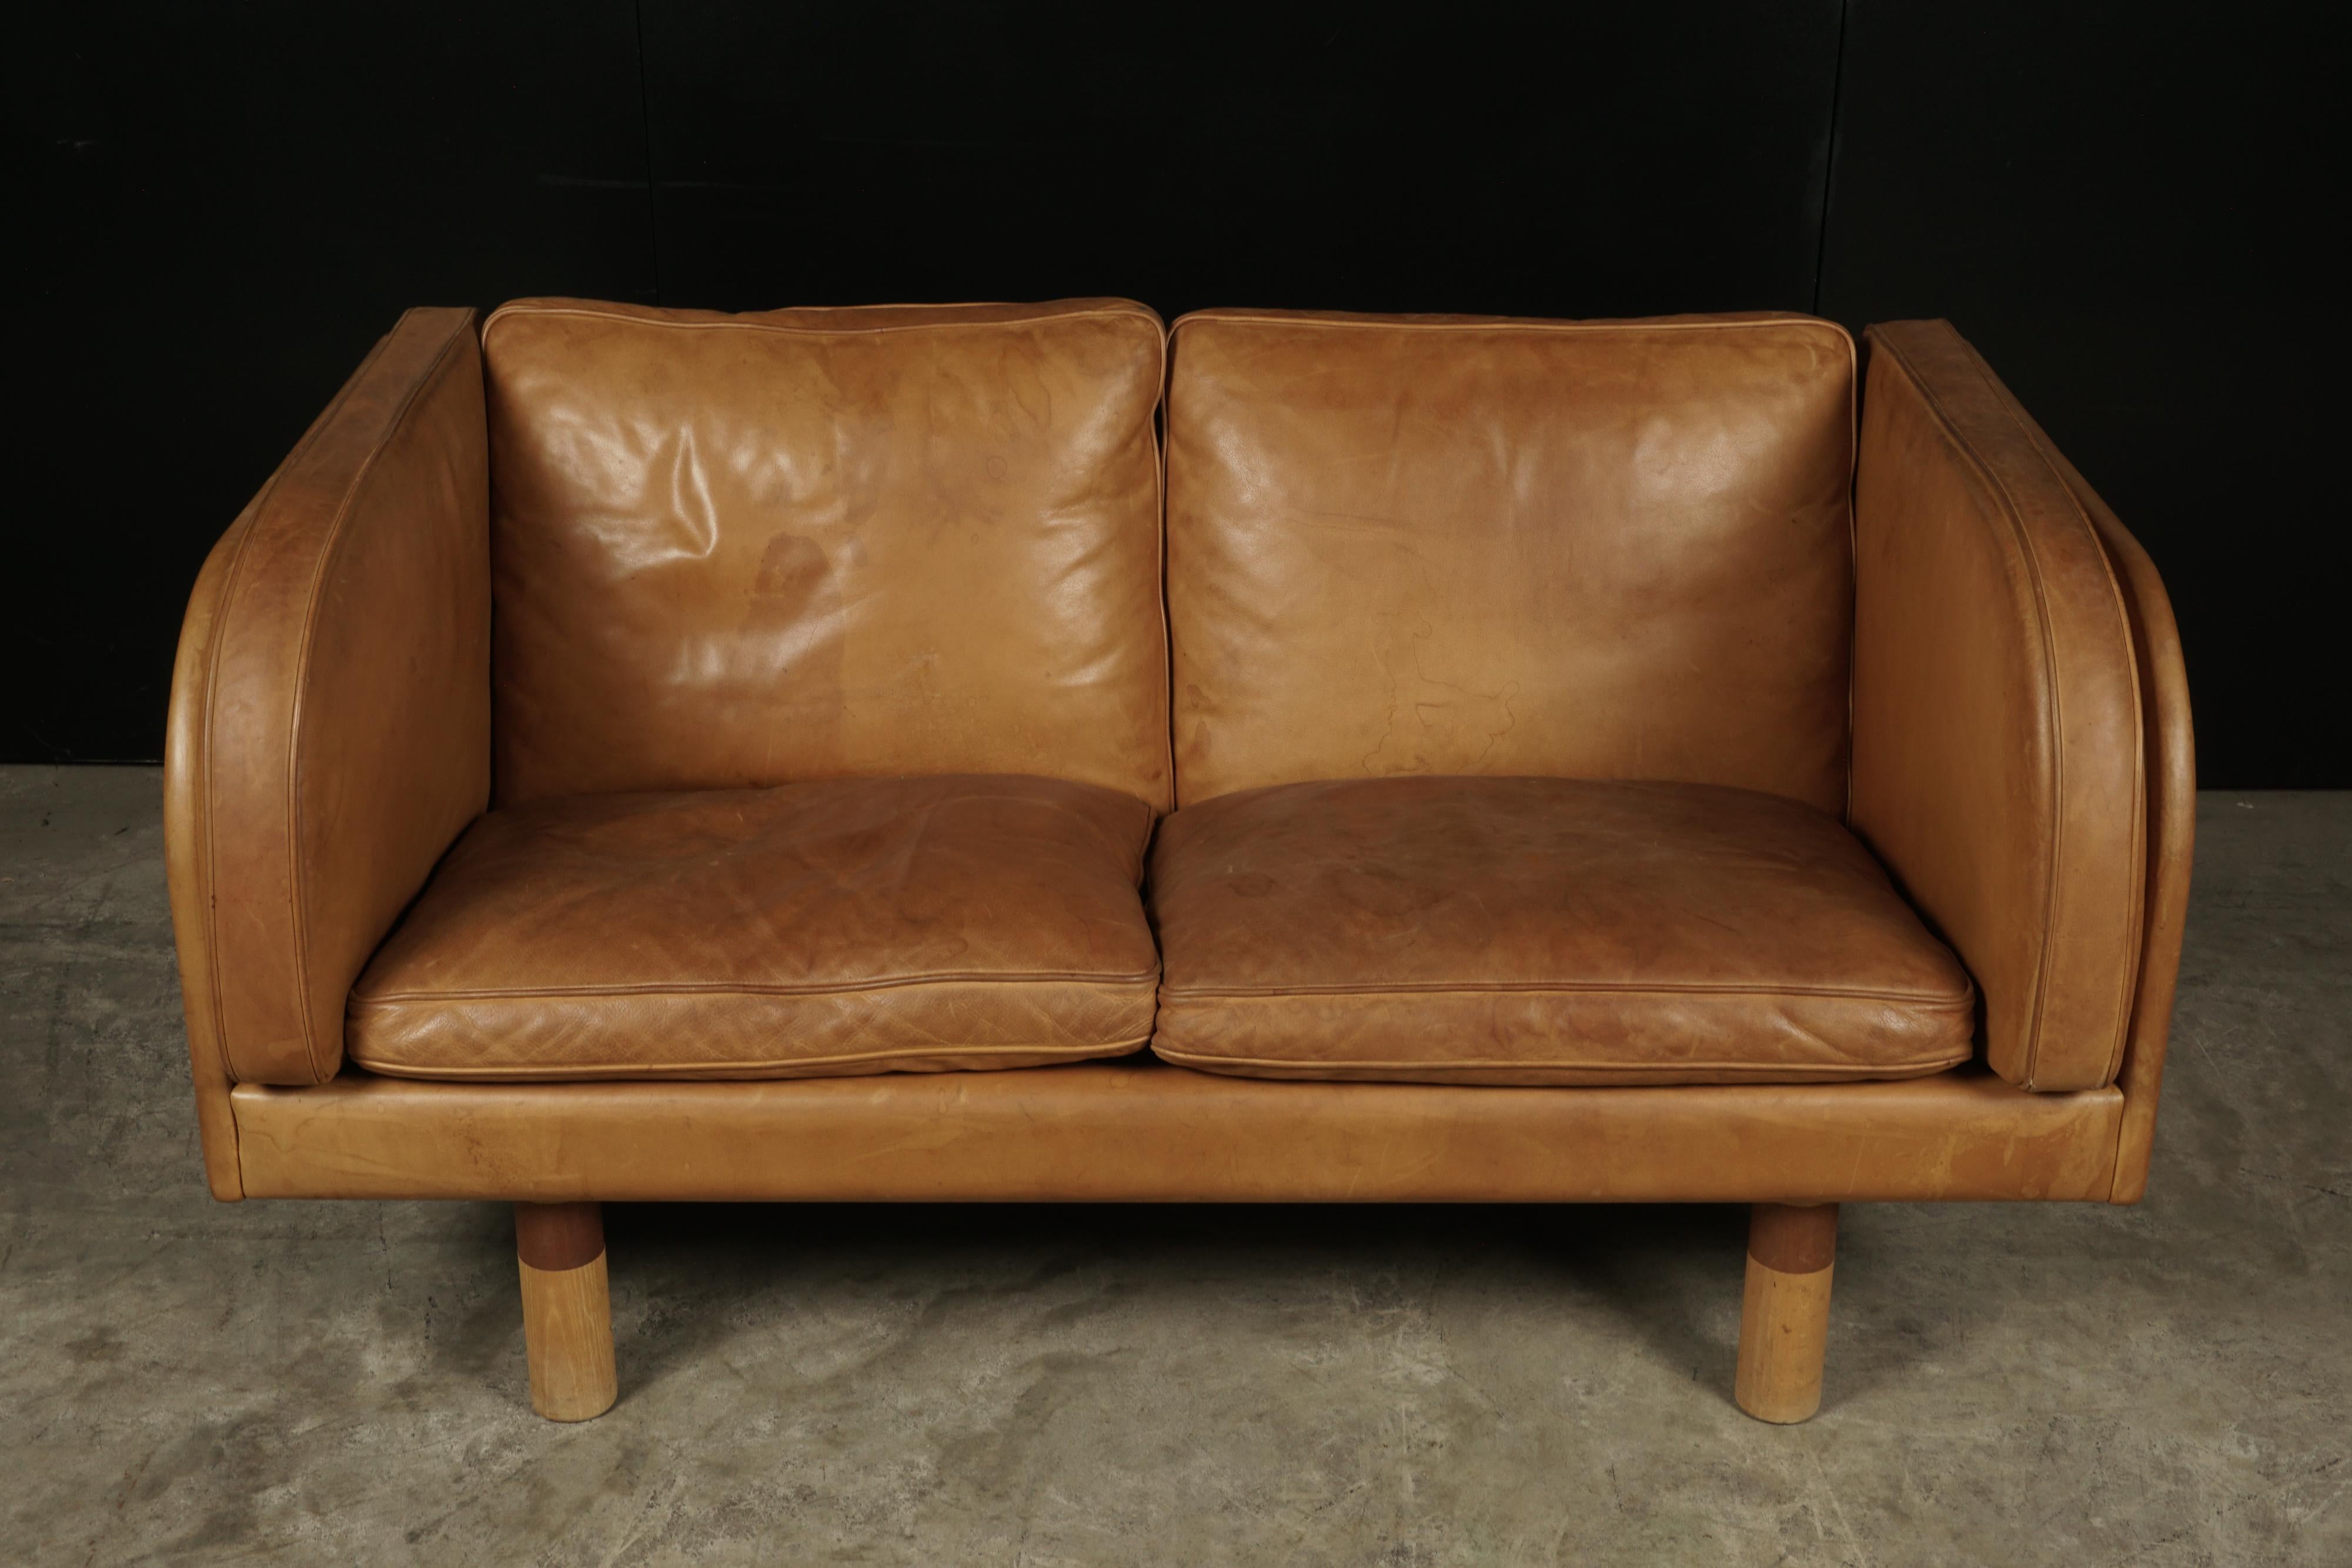 Rare Pair of Two-Seat Sofas in Cognac Leather Designed by Jørgen Gammelgaard 2